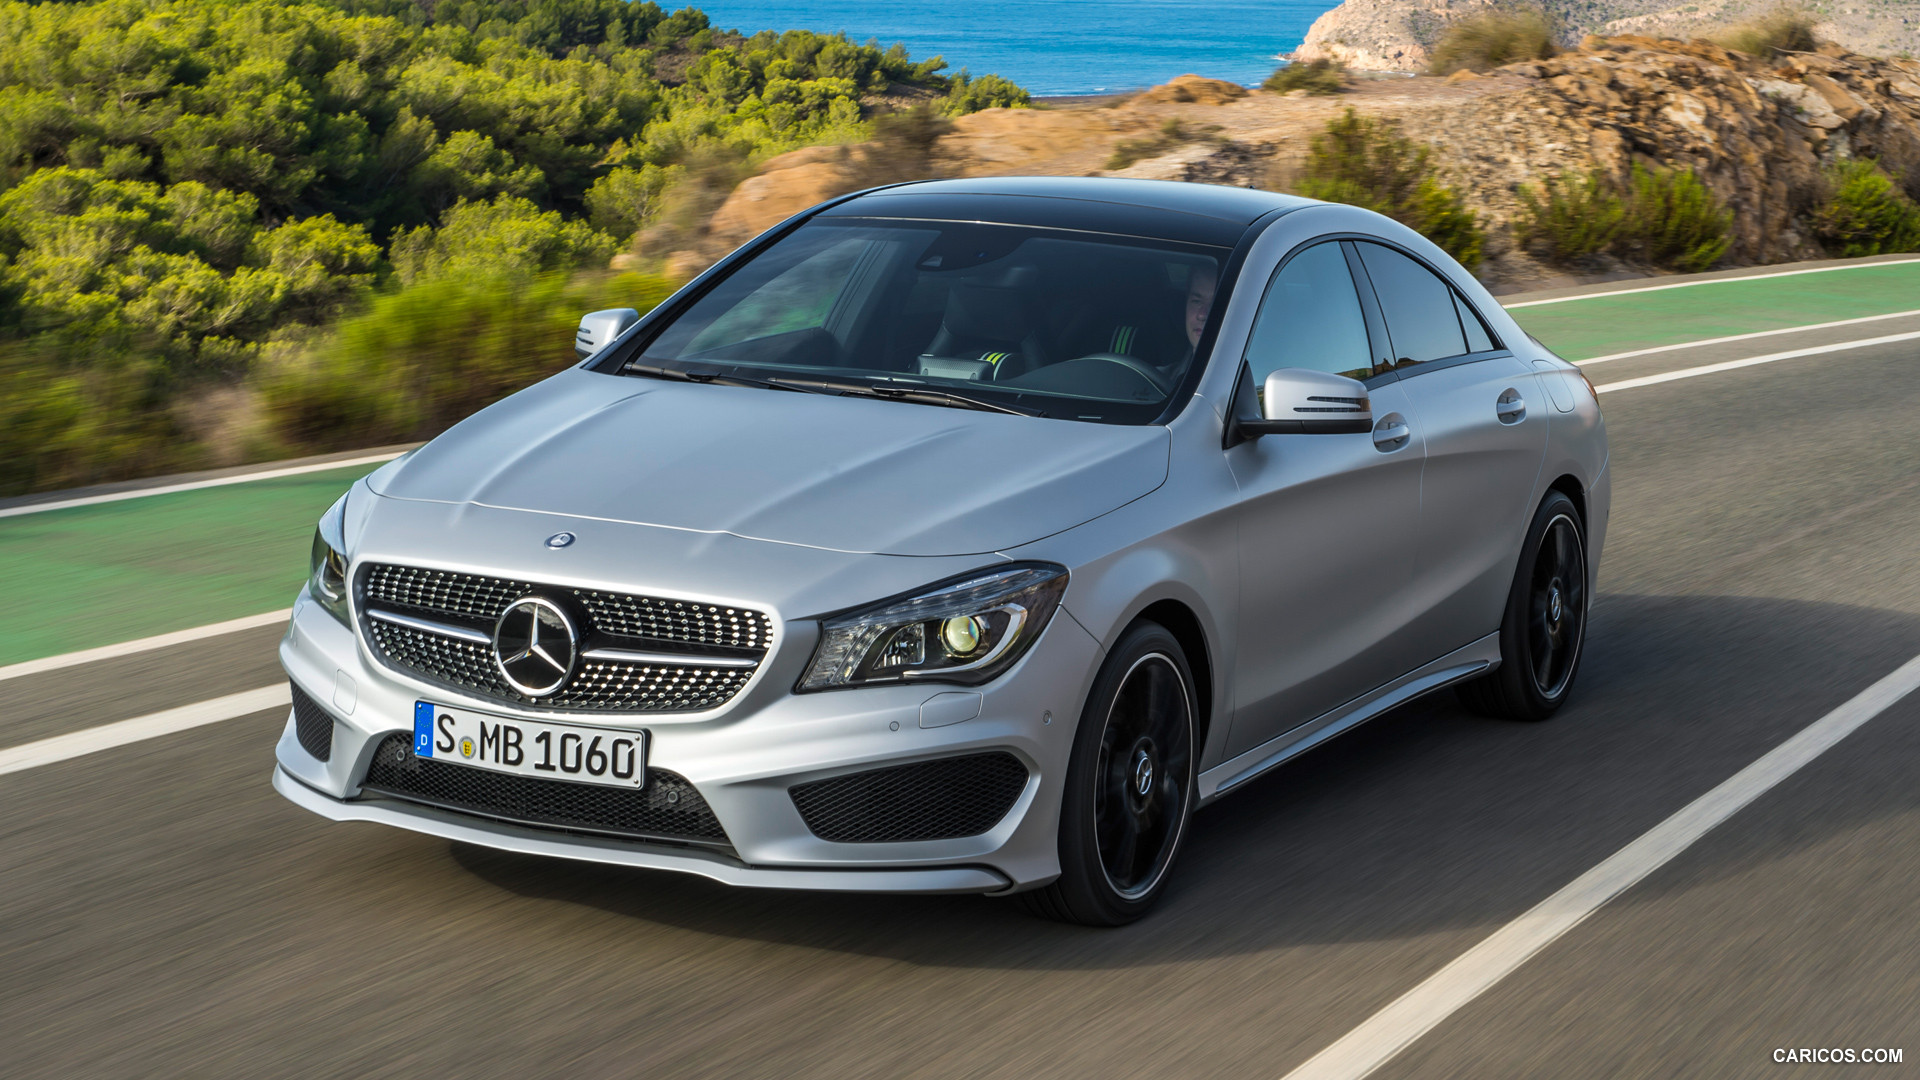 2014 Mercedes-Benz CLA-Class CLA 250 Edition 1 - Front, #7 of 183